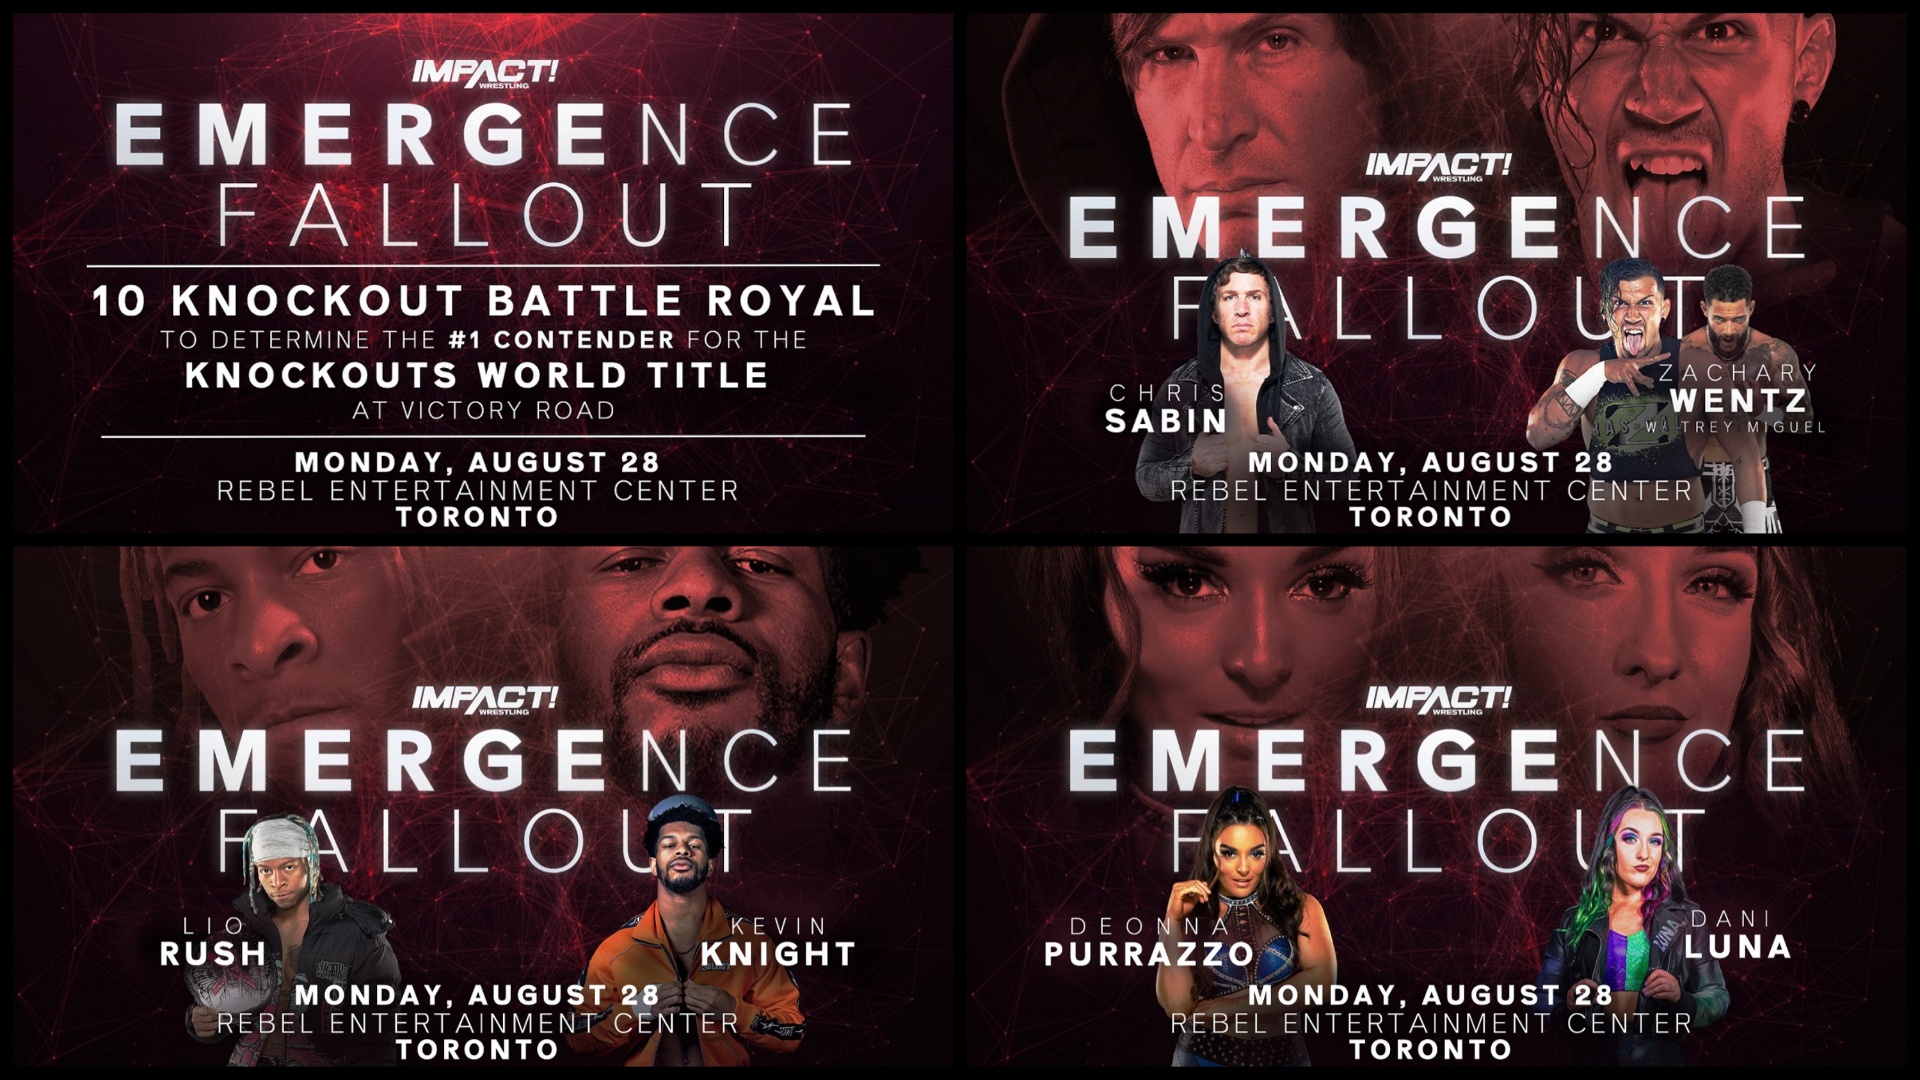 Must-See Matchups Set For Emergence Fallout This Monday in Toronto – IMPACT Wrestling